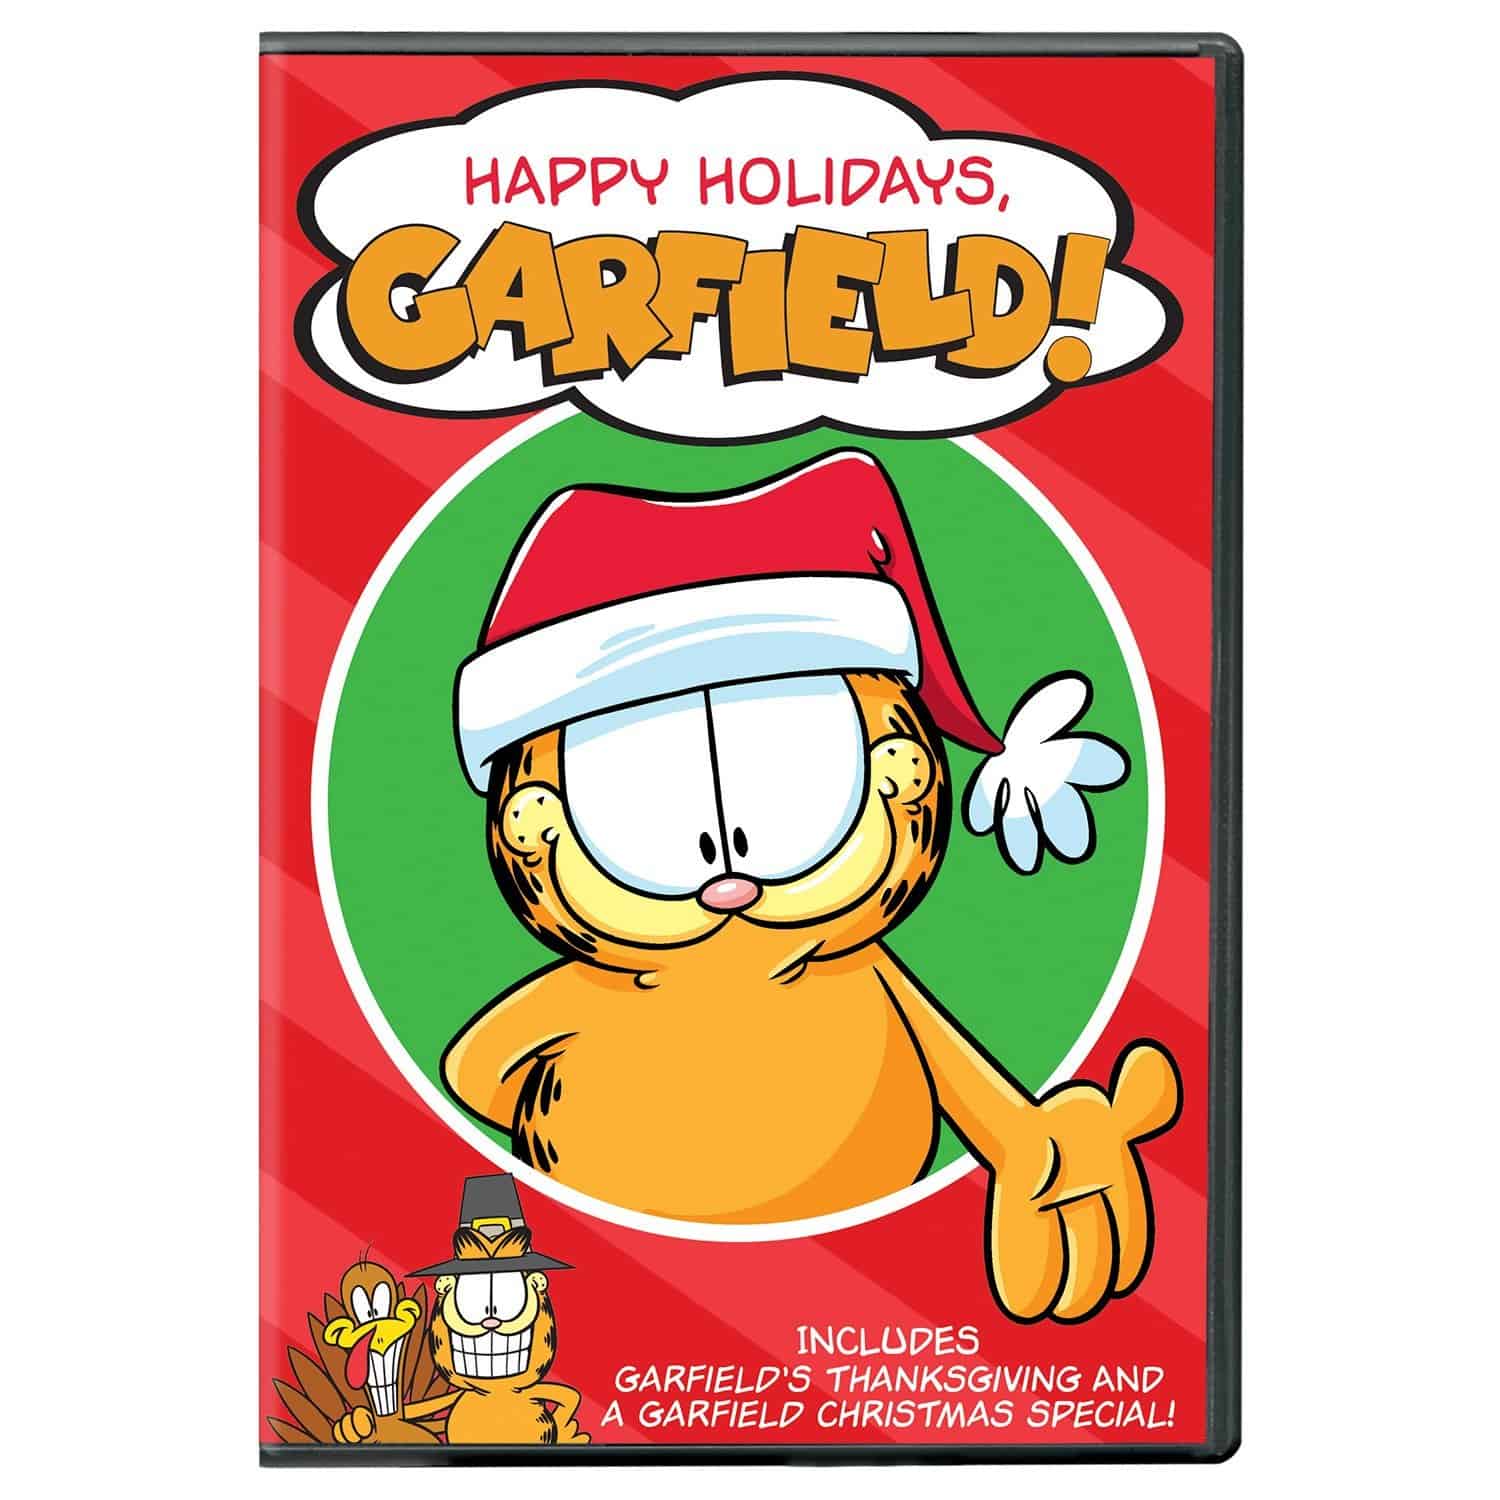 Happy Holidays, Garfield on DVD [Thanksgiving and Christmas]